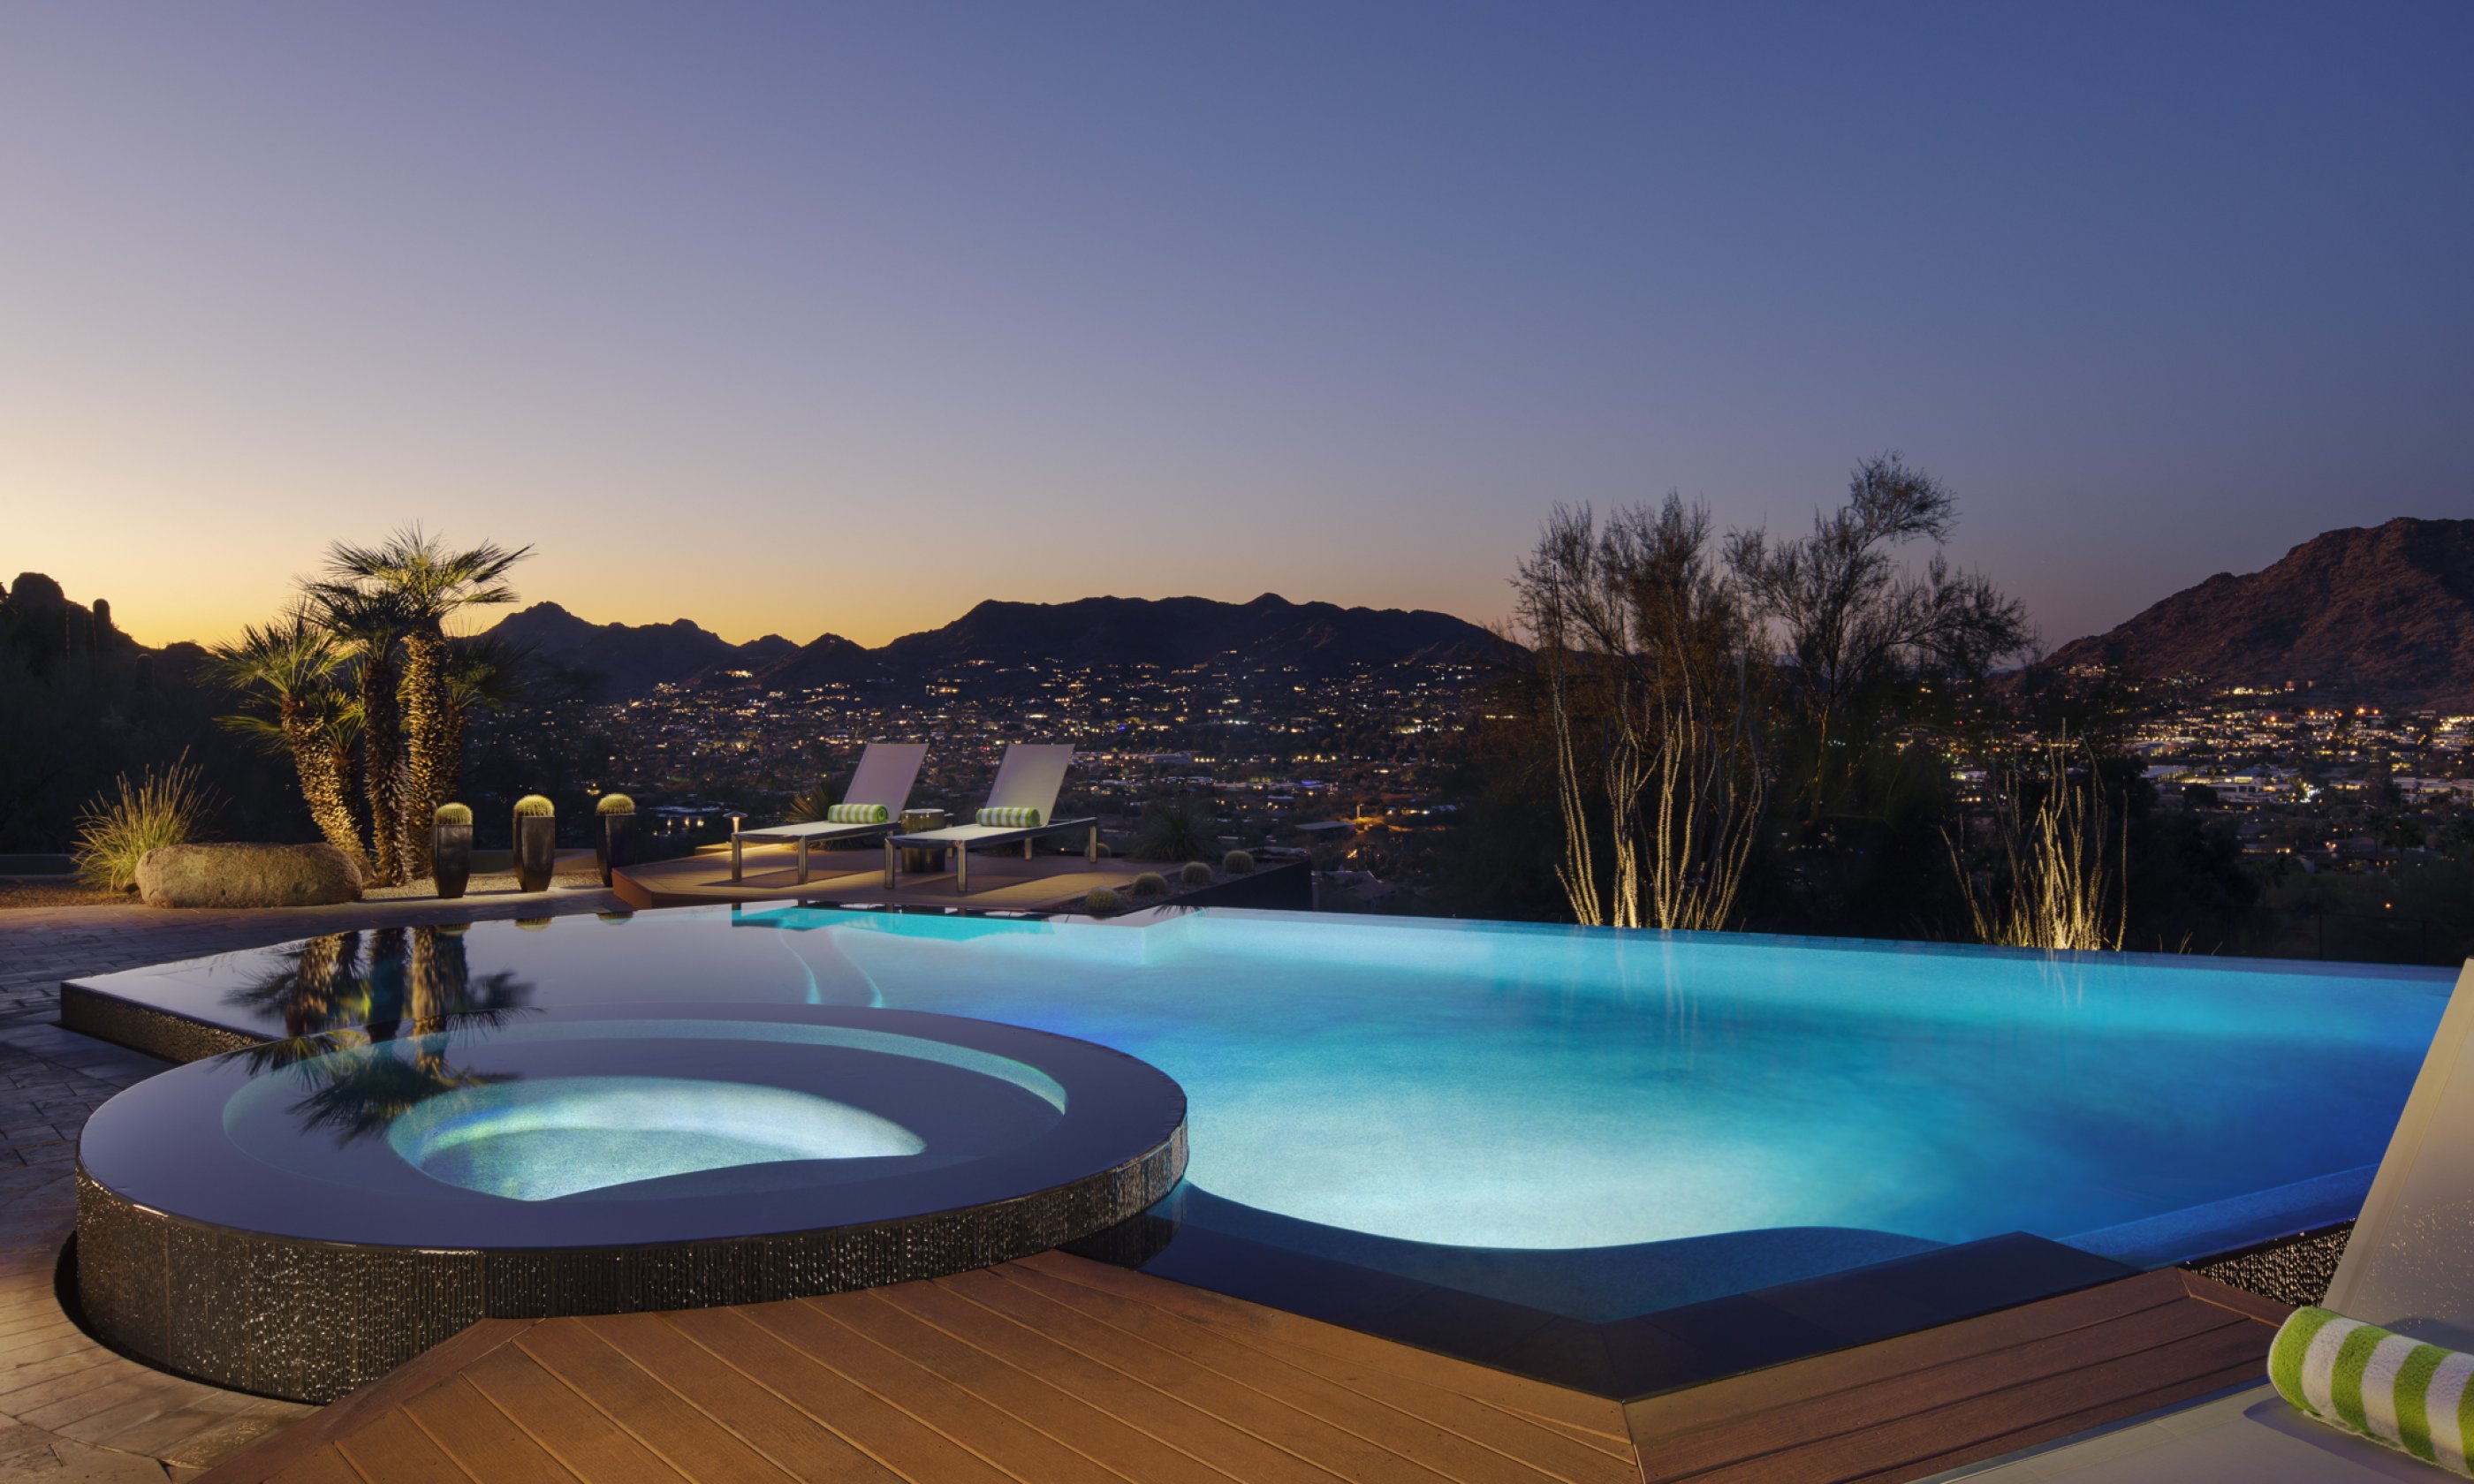 Hot tub and pool with two lounge chairs overlooking surrounding valley at dusk.